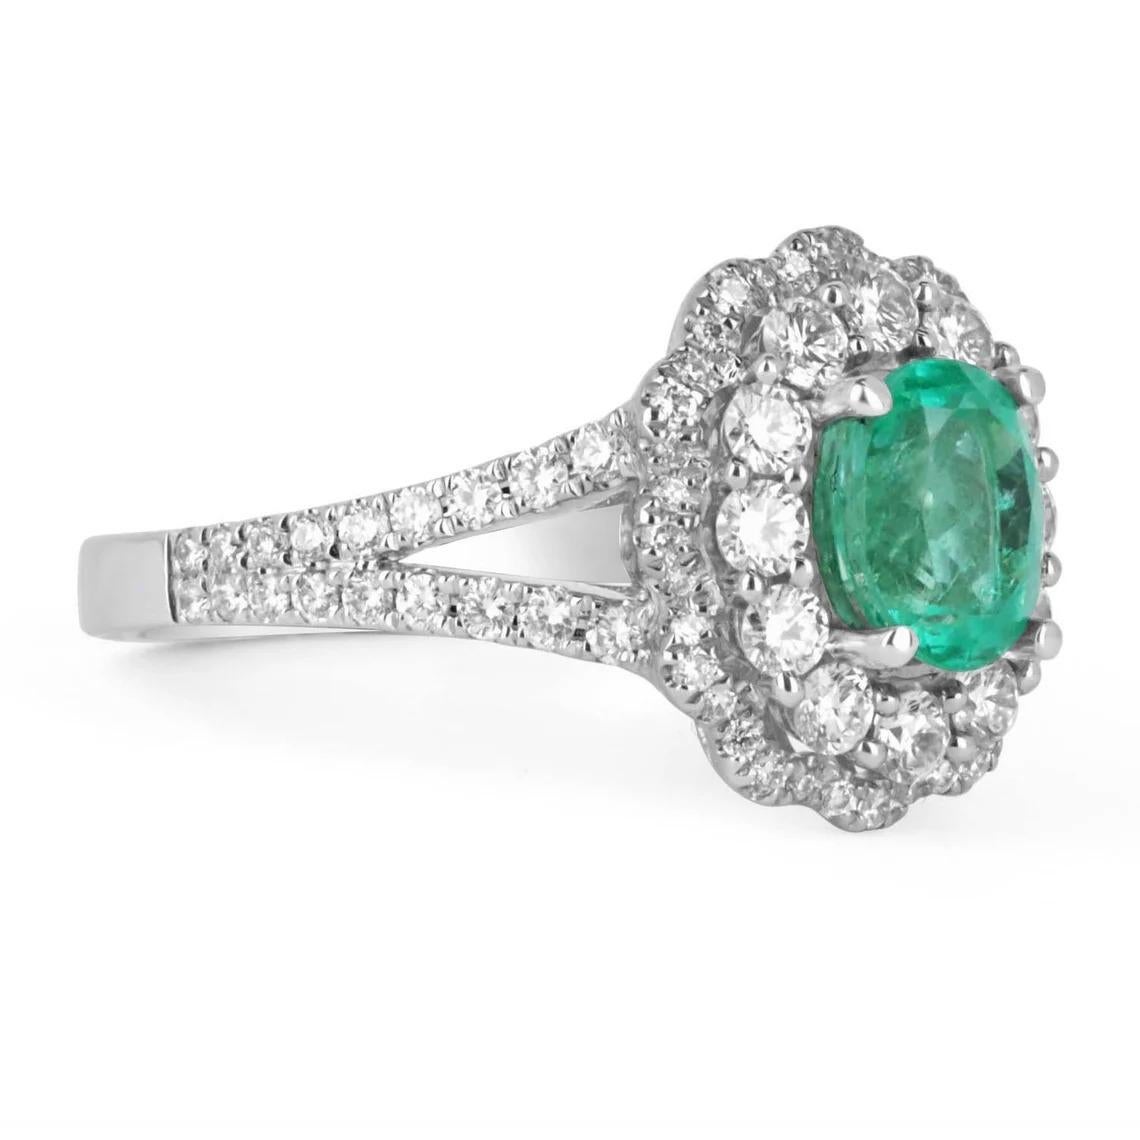 Displayed is a magnificent 2.10tcw natural Colombian emerald and diamond double halo cocktail gold ring. This is a perfect statement ring with a gorgeous center stone. The center gemstone is a fine quality Muzo emerald handset in a 14K white gold